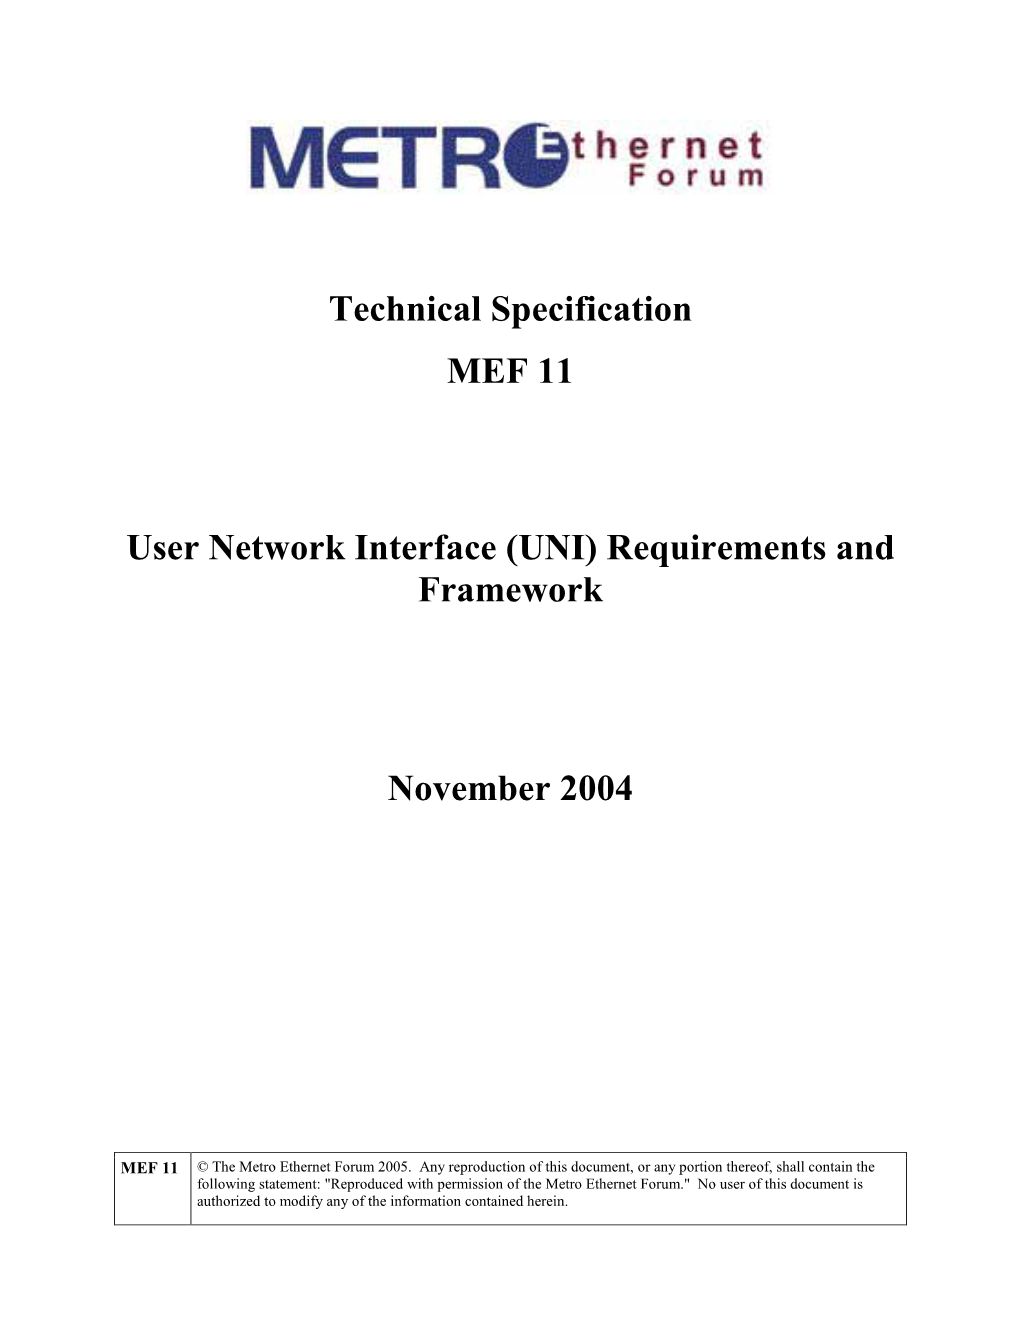 User Network Interface (UNI) Requirements and Framework